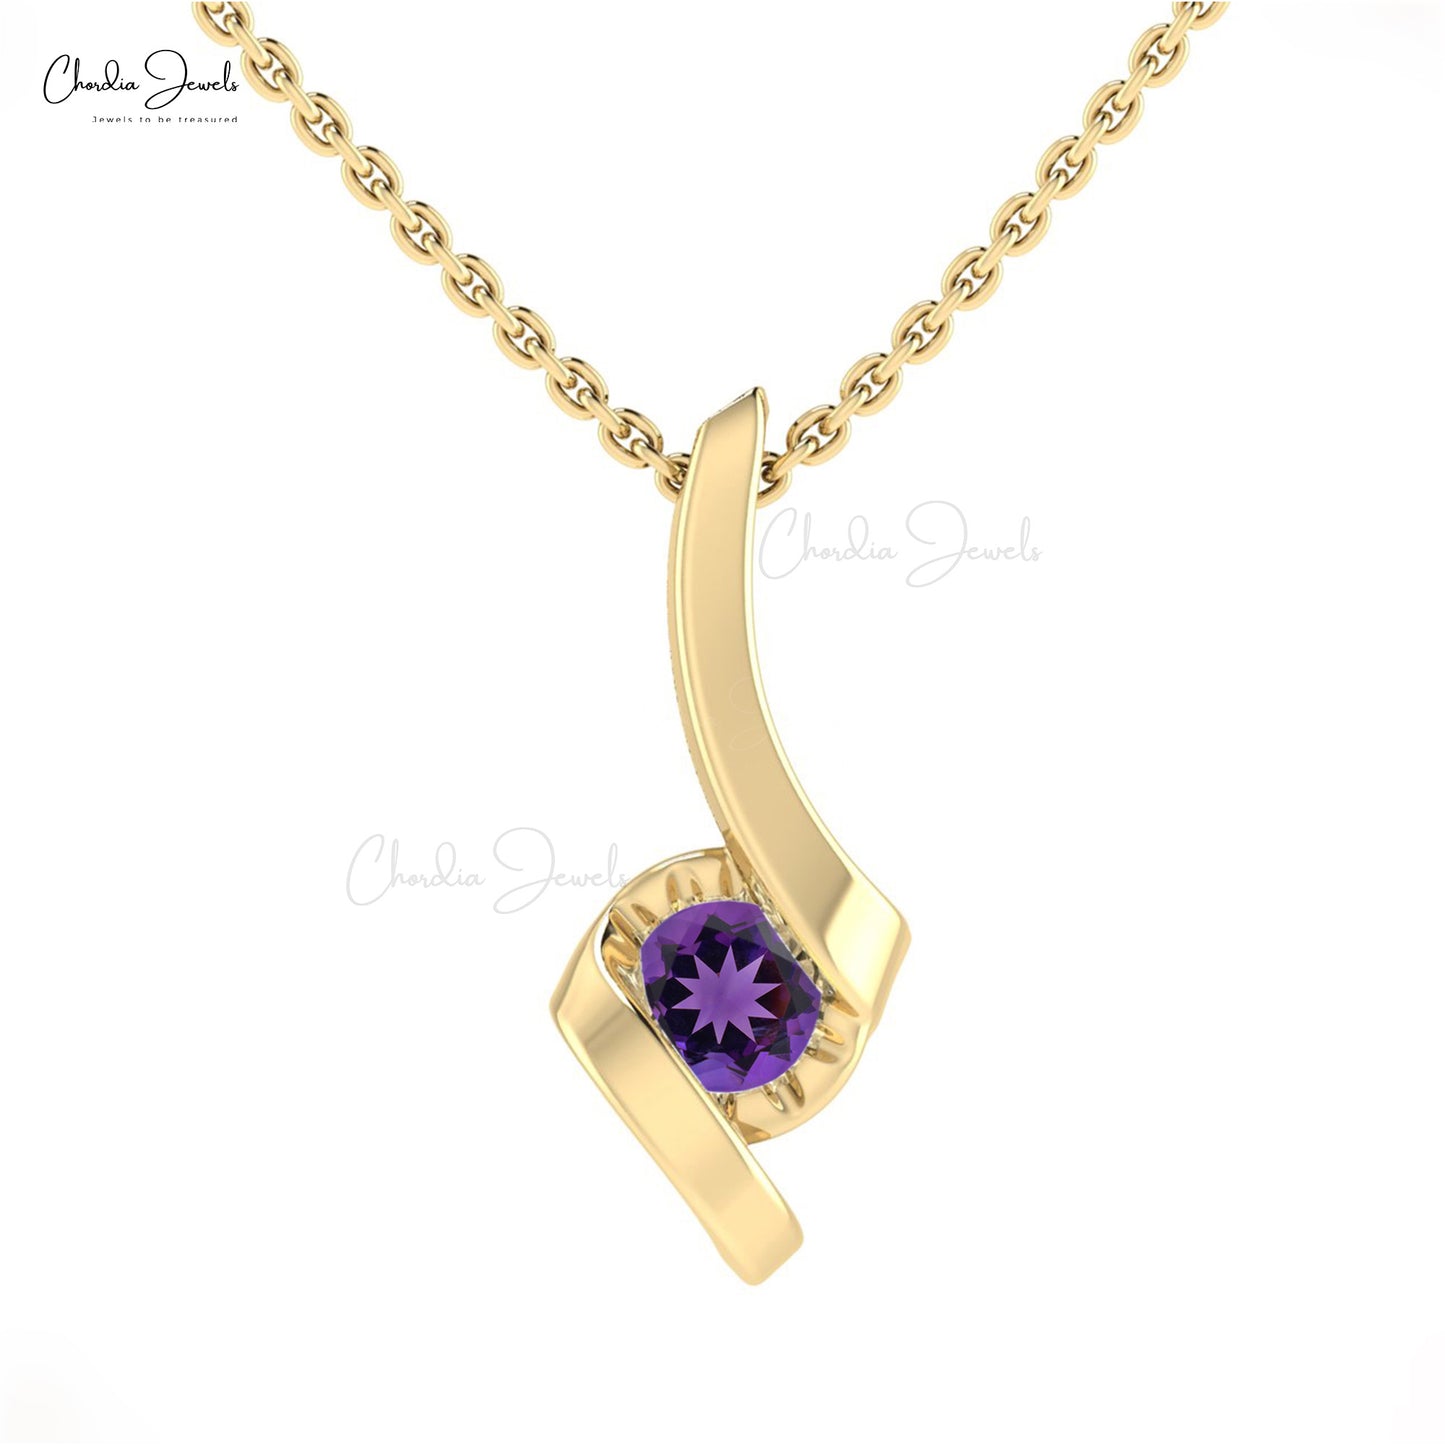 Genuine Amethyst Pendant, 14k Solid Gold Handmade Pendant, 4mm Round Gemstone Solitaire Pendant Gift for Wife